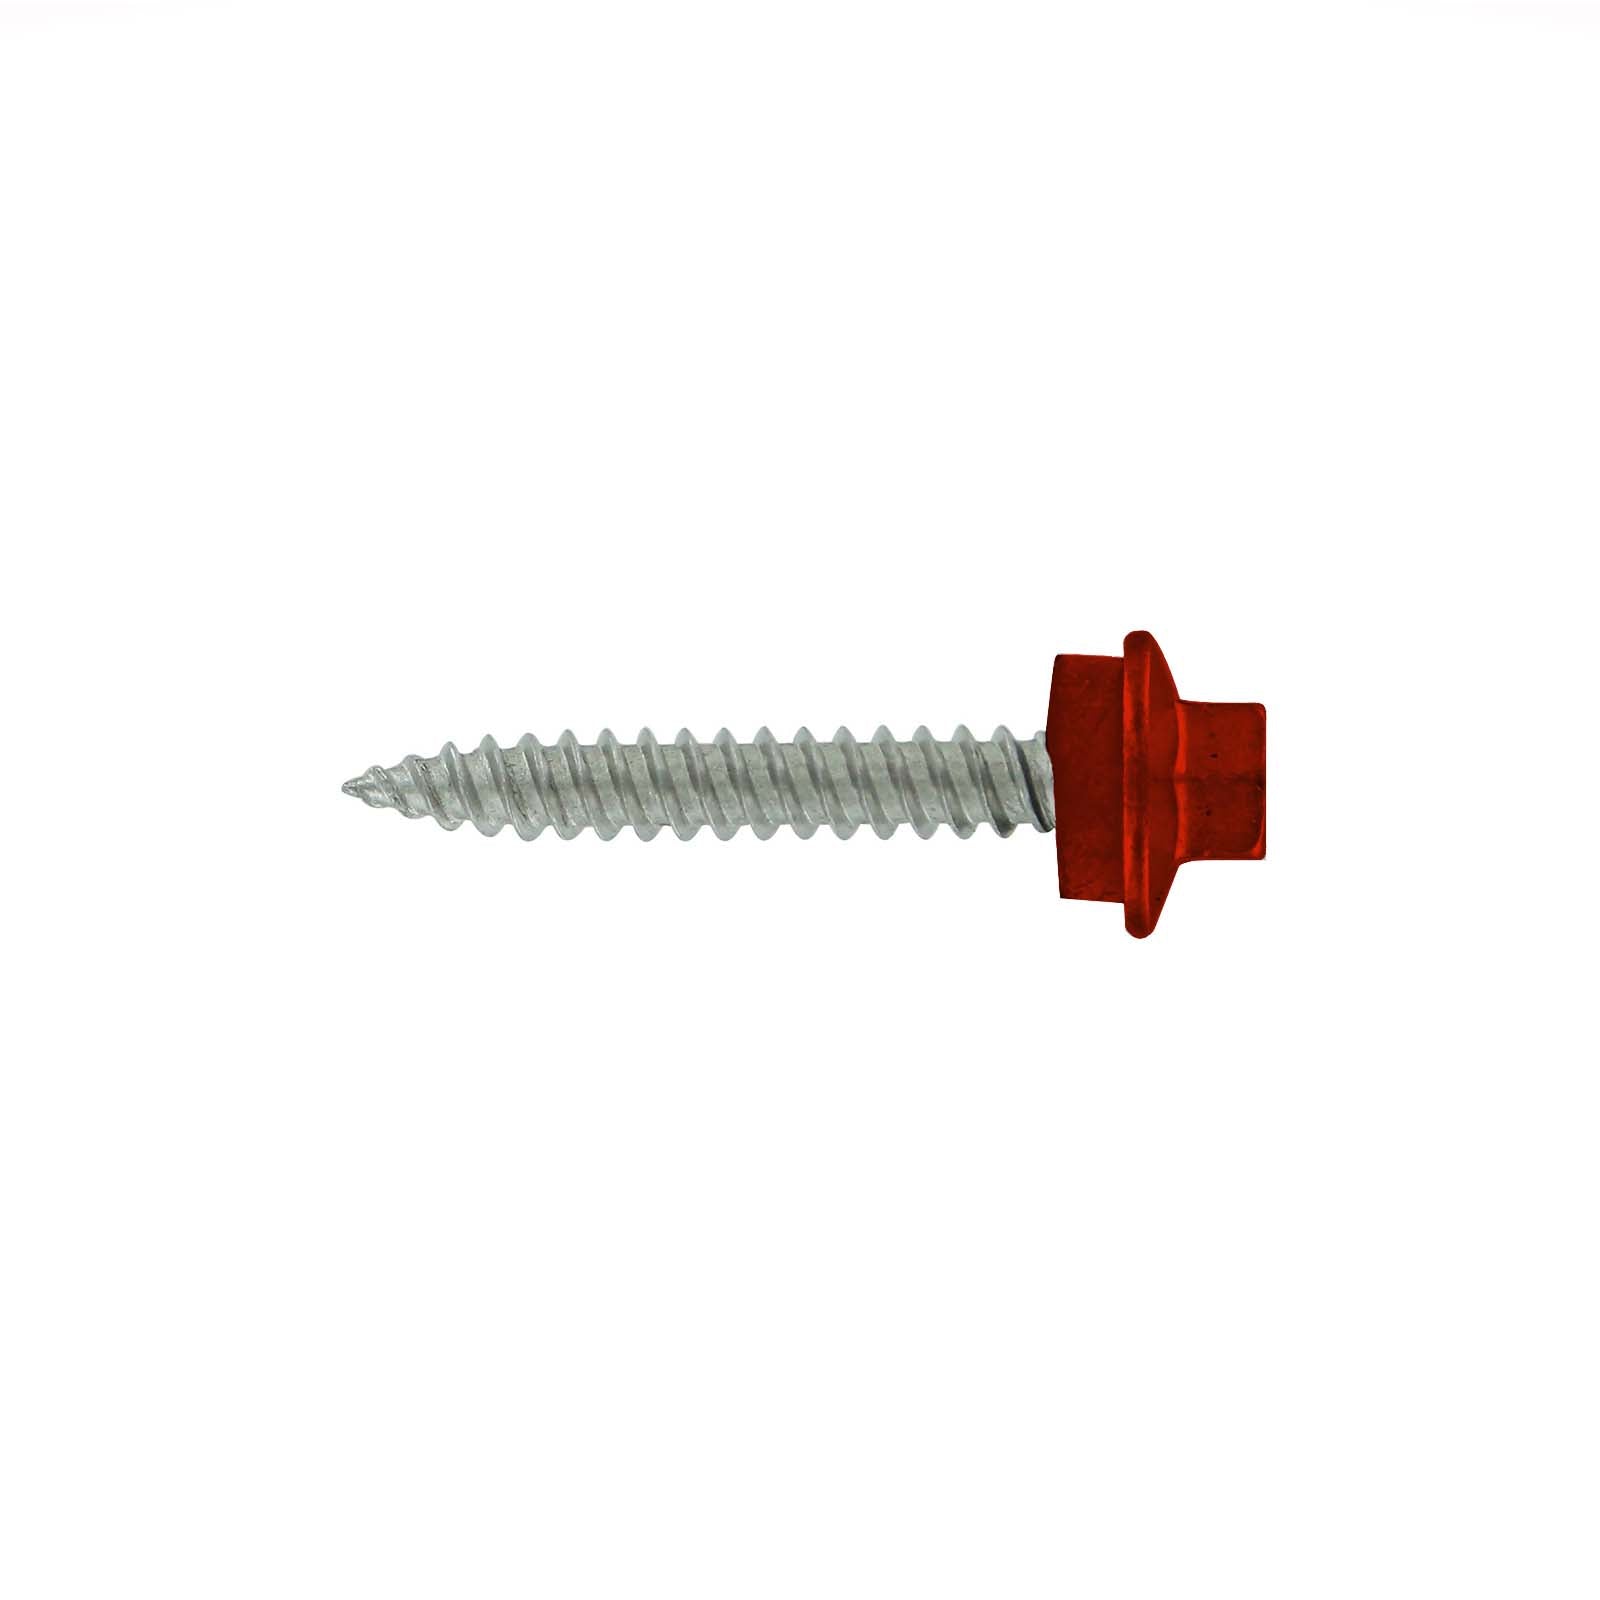 #10 x 1 inch SS Woodbinder Metal Roofing Screw Rustic Red Pkg 250 image 1 of 2